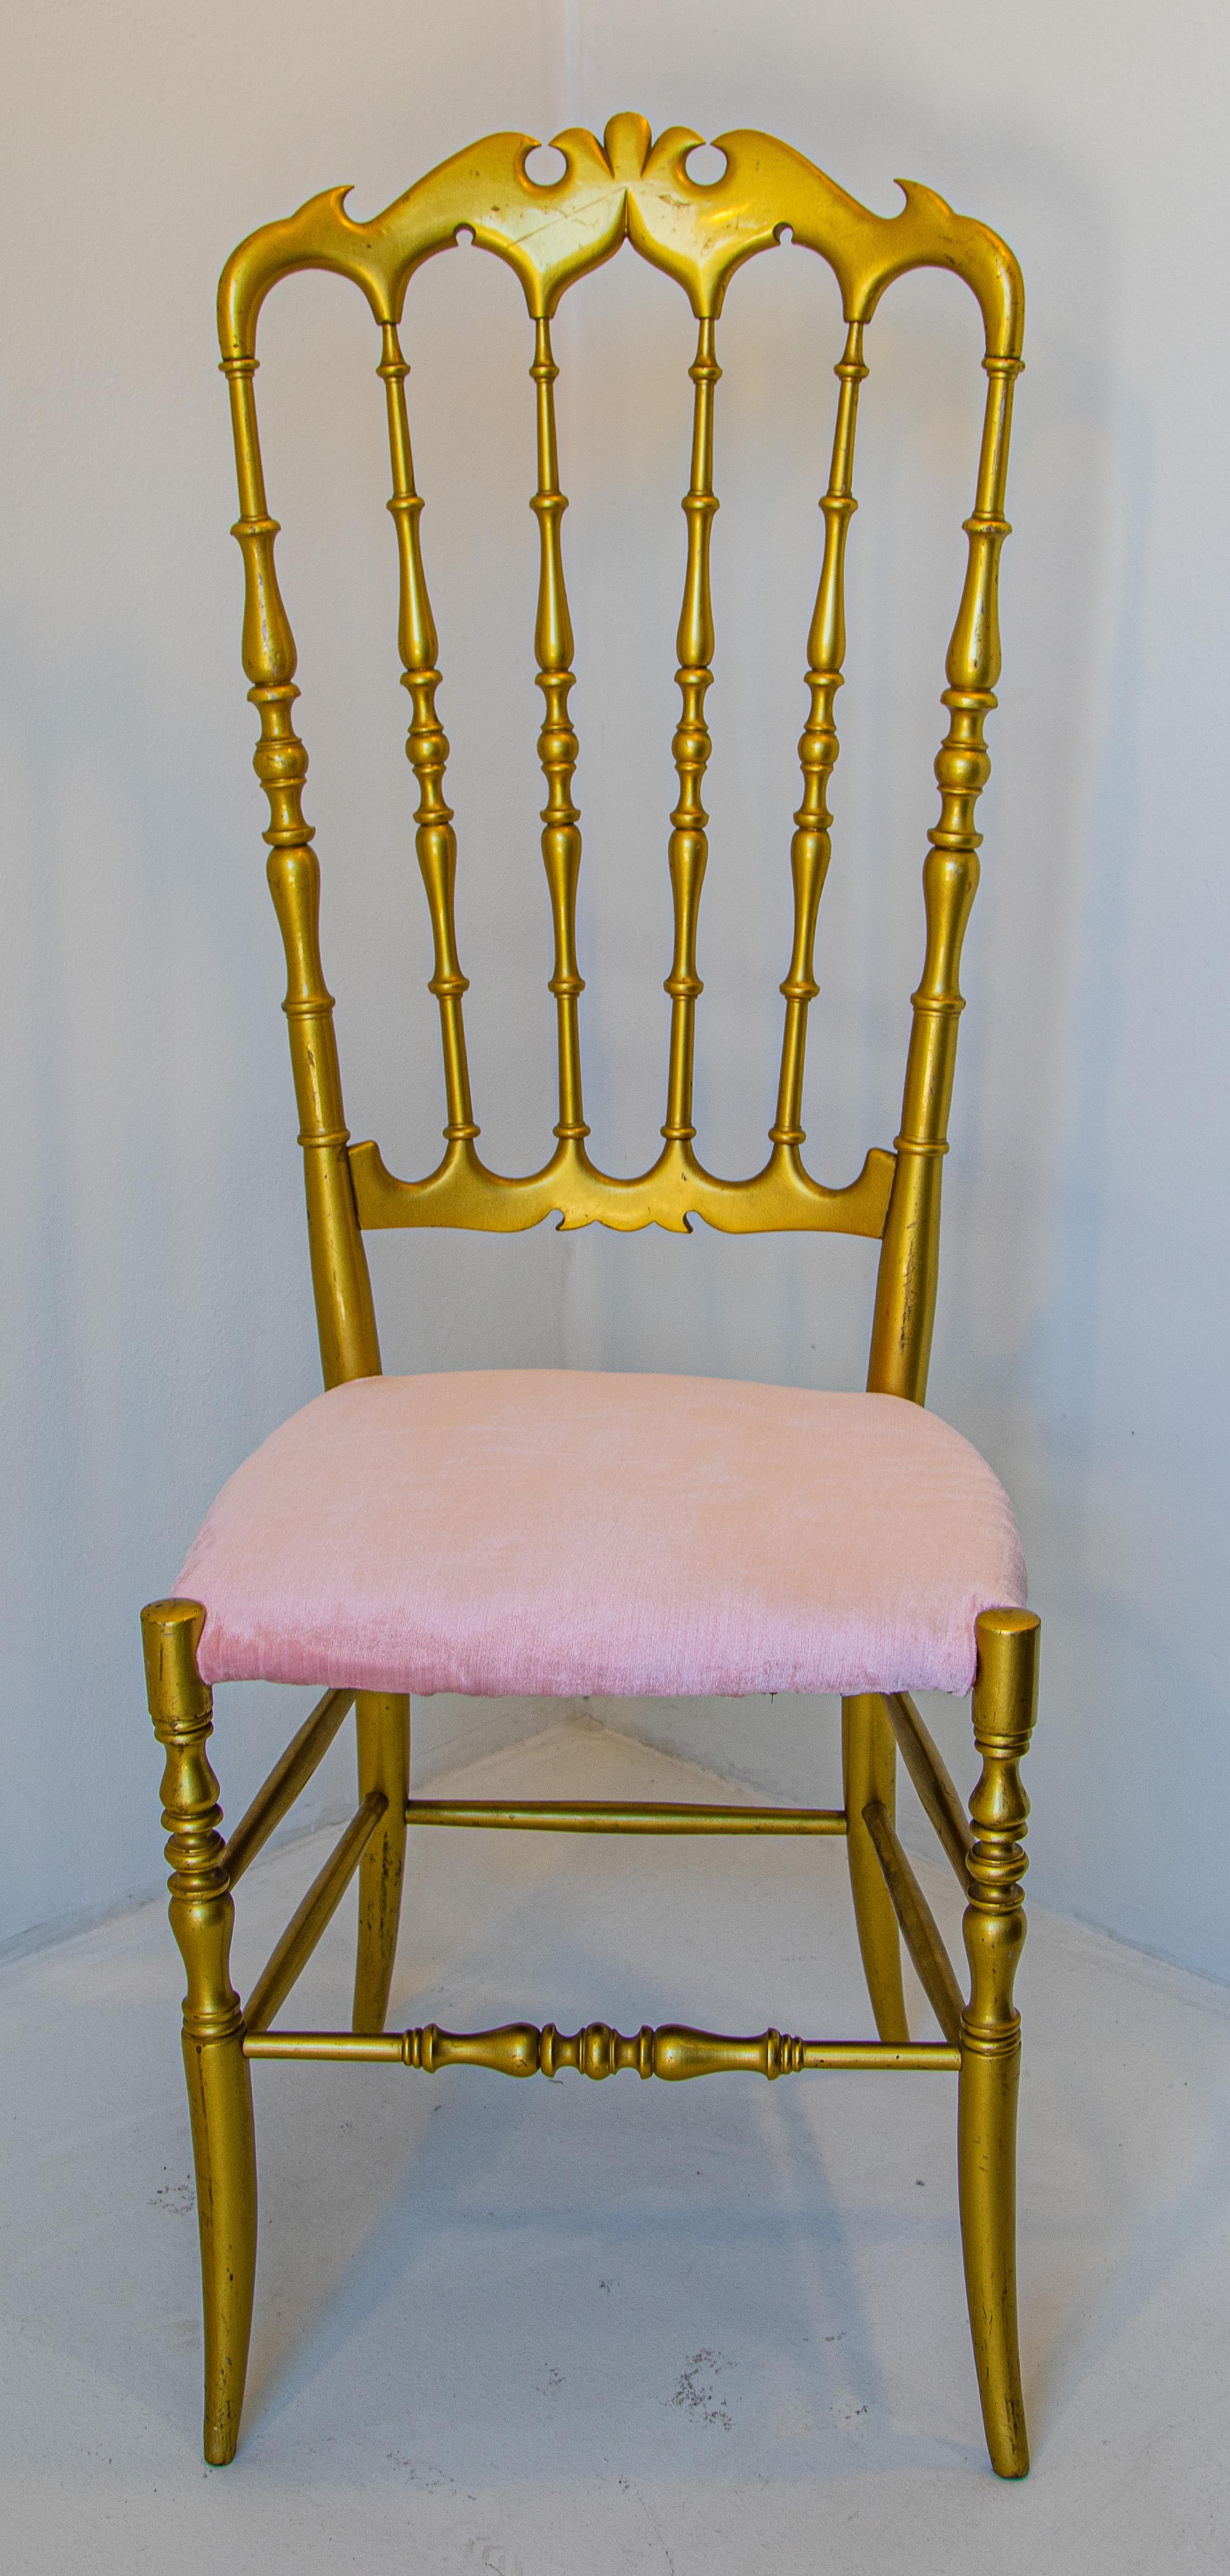 Stunning Italian Chiavari chair with bat motif and velvet upholstery, circa 1960s.
Designed by Giuseppe Gaetano Descalzi and produced since the early 19th century in the Ligurian town of Chiavari, Italy.
Perfect for a writing desk, boudoir, bathroom